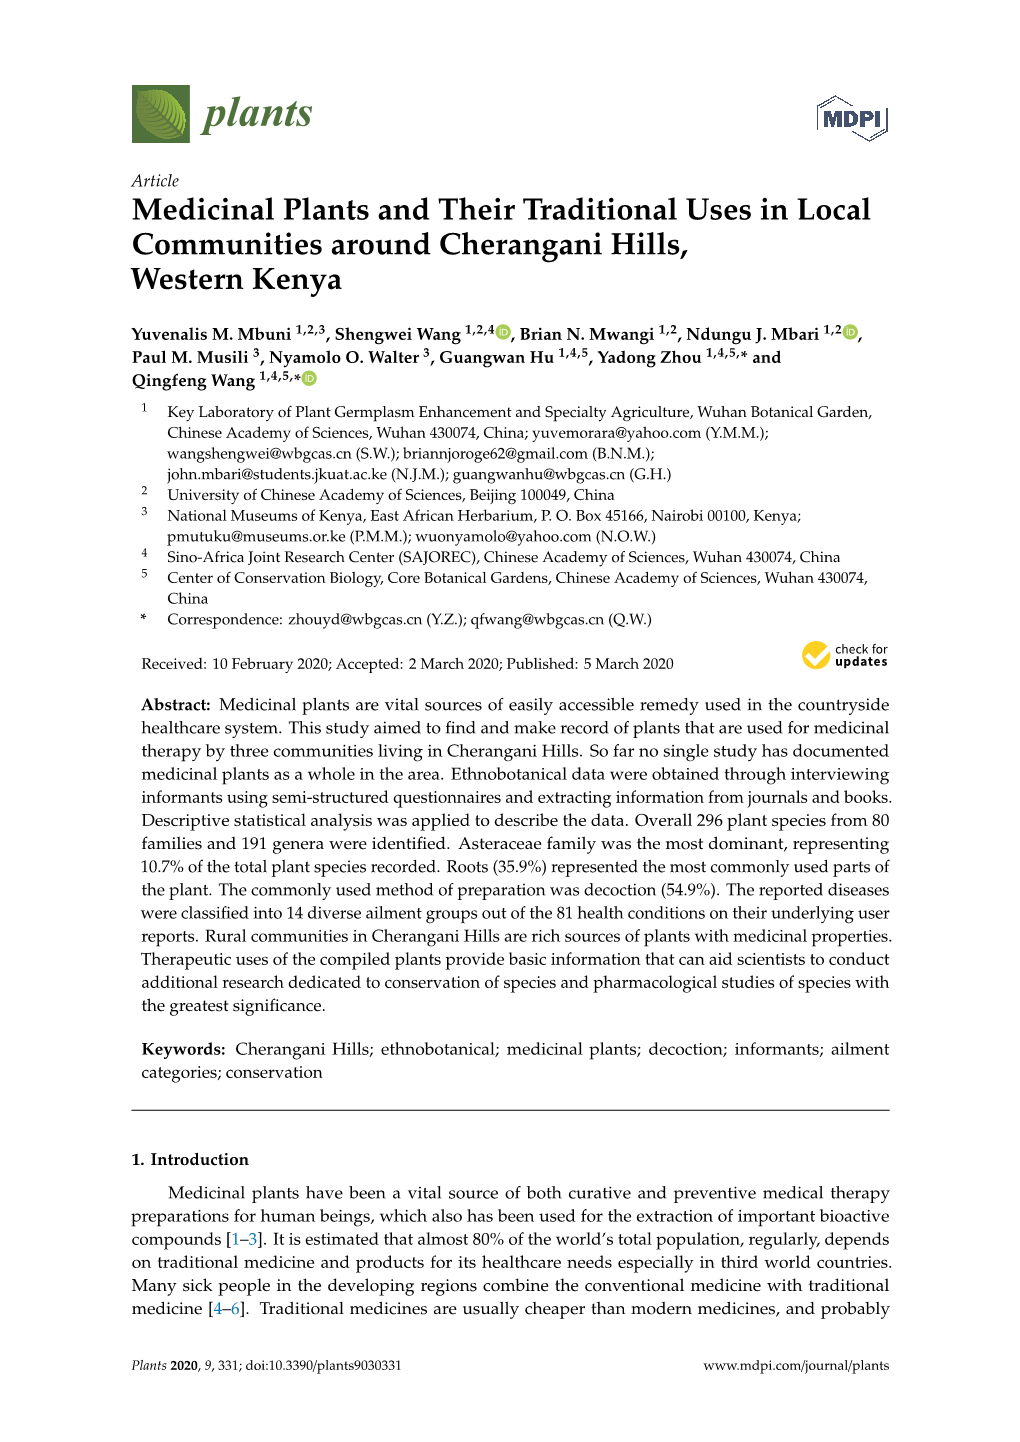 Medicinal Plants and Their Traditional Uses in Local Communities Around Cherangani Hills, Western Kenya